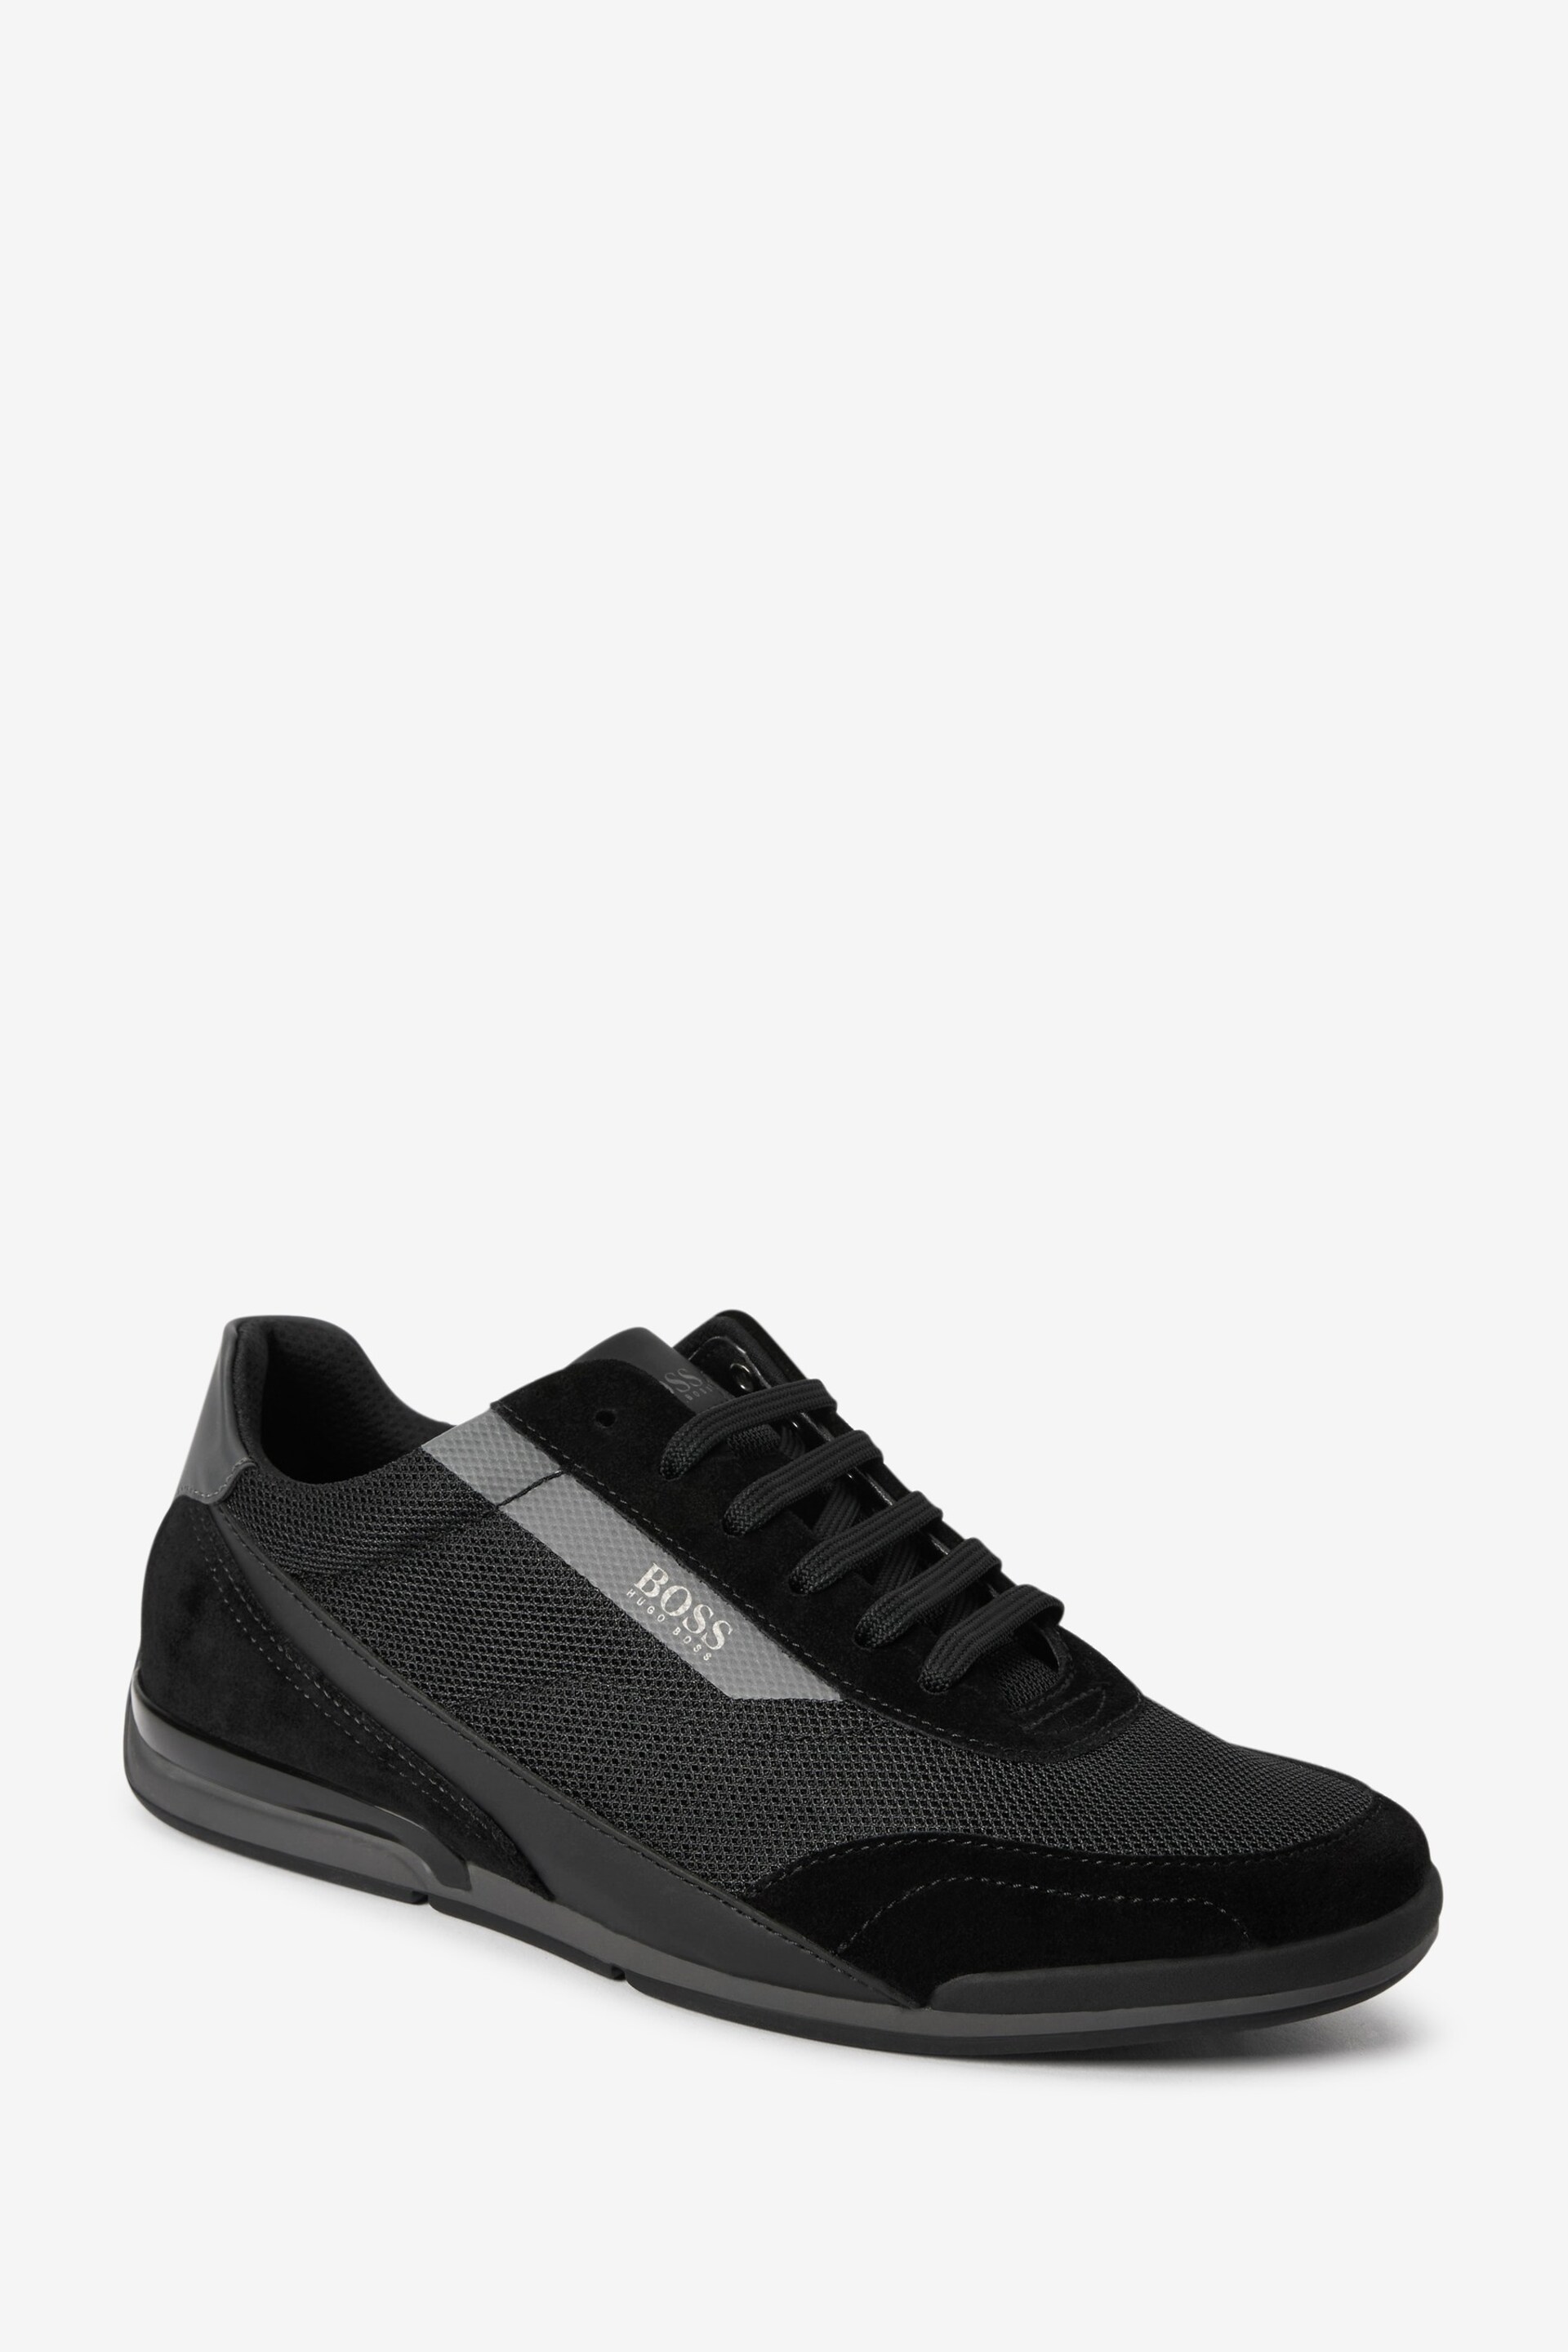 BOSS Black Saturn Trainers - Image 2 of 6